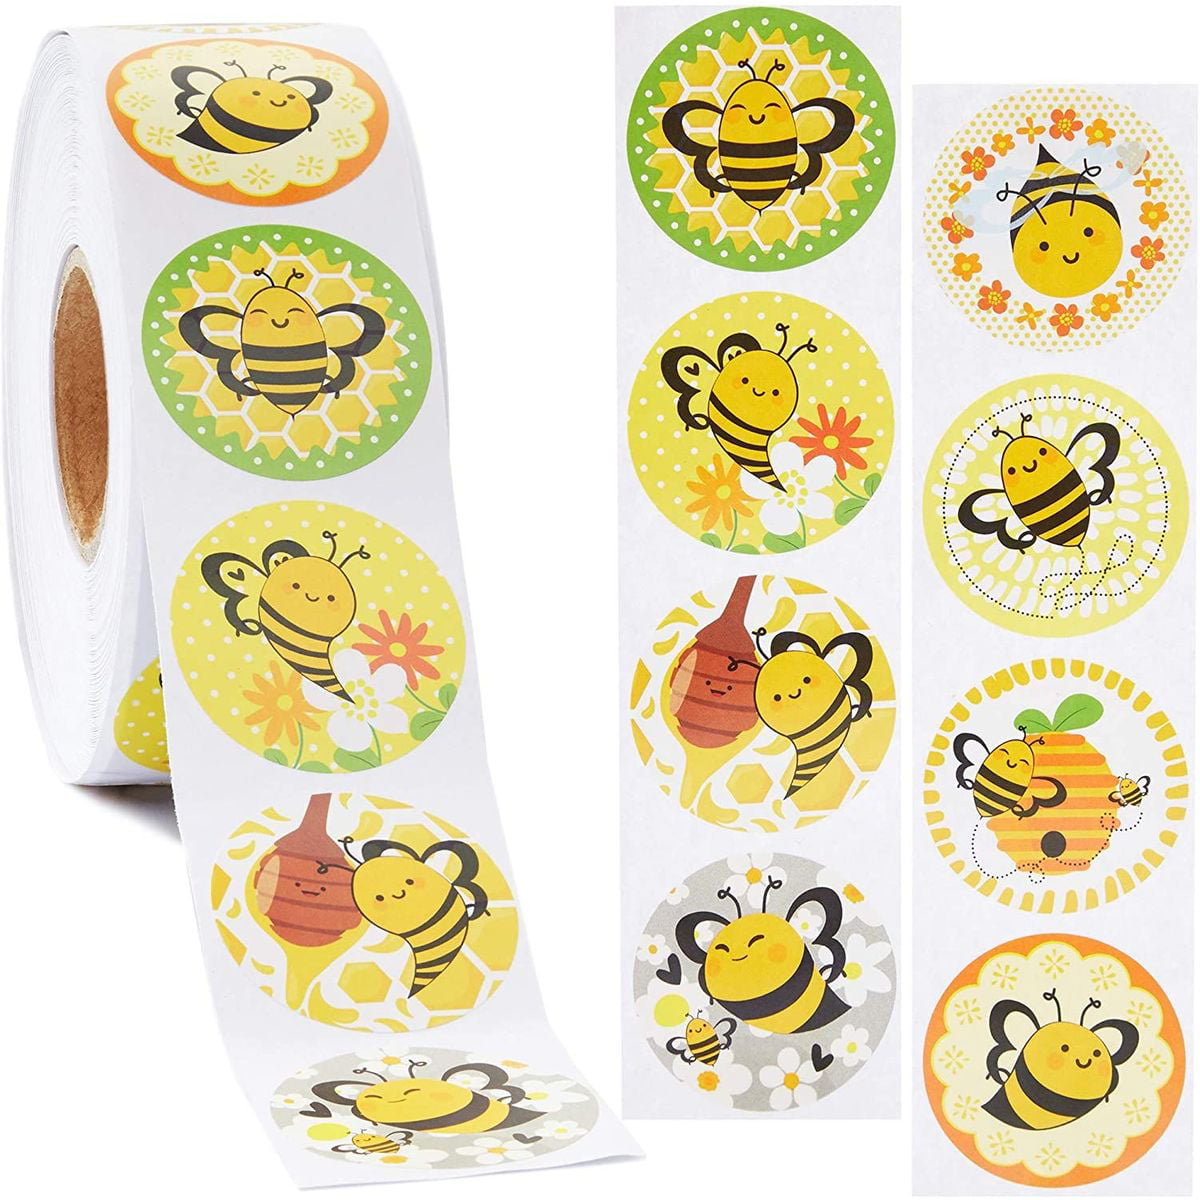 THANK YOU BUMBLE BEE ENVELOPE SEALS LABELS STICKERS choice of sizes 